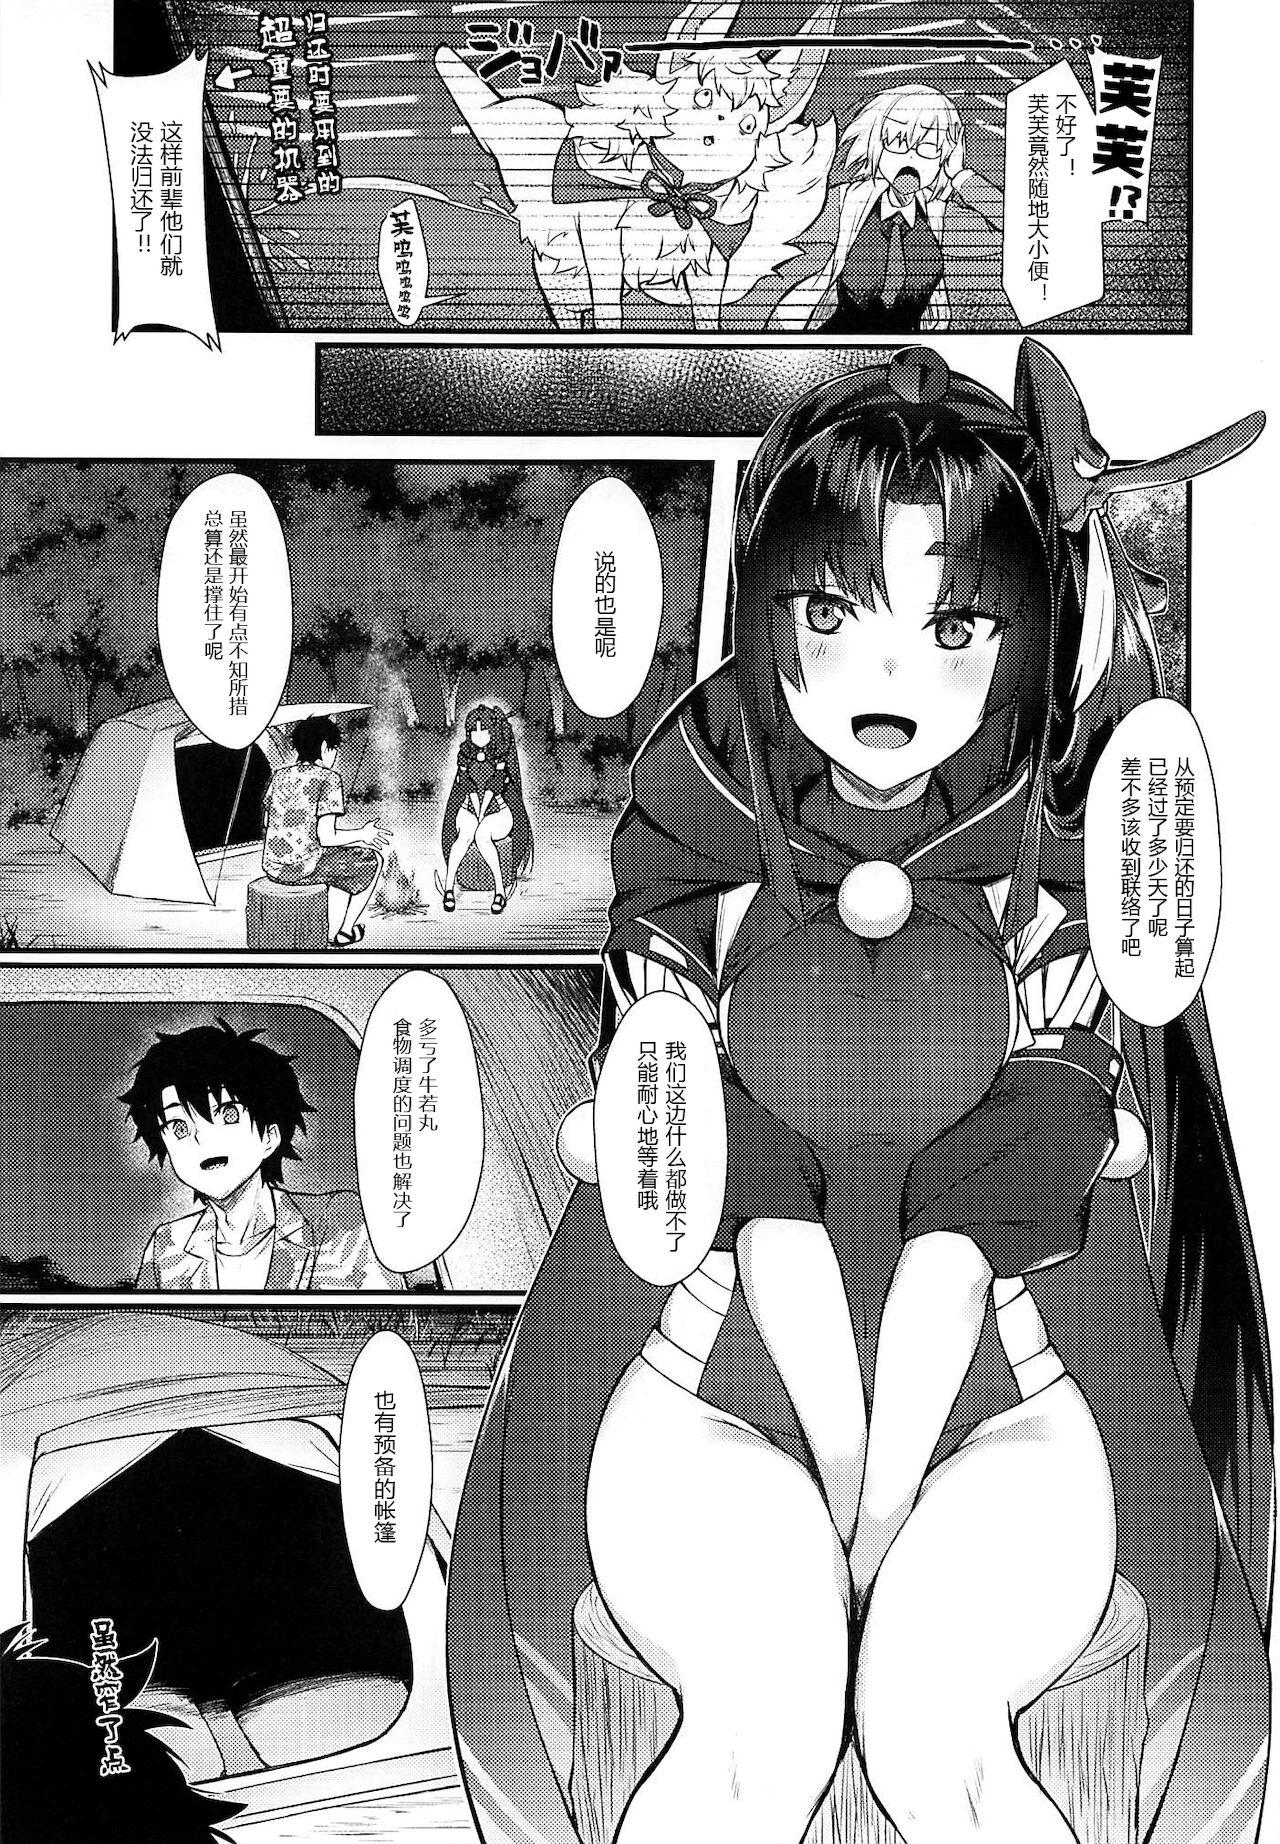 Teenage Sex Ponpoko Summer Camp - Fate grand order Rubdown - Page 3